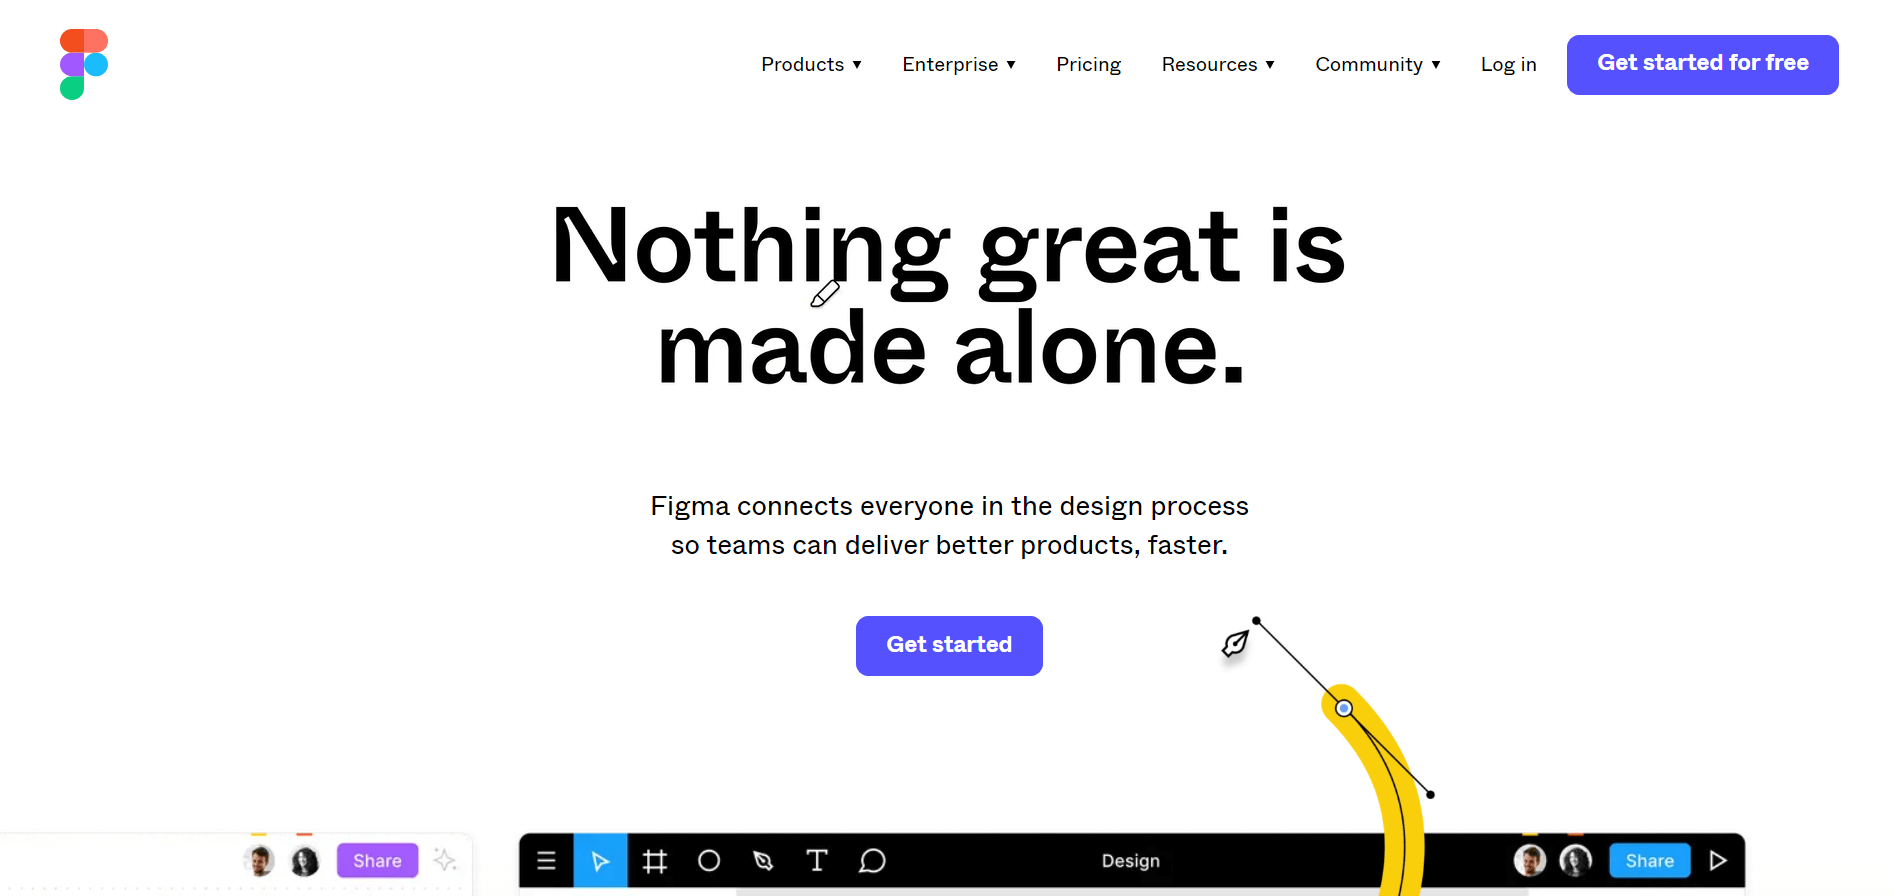 Figma homepage showing the motto "Nothing great is made alone".